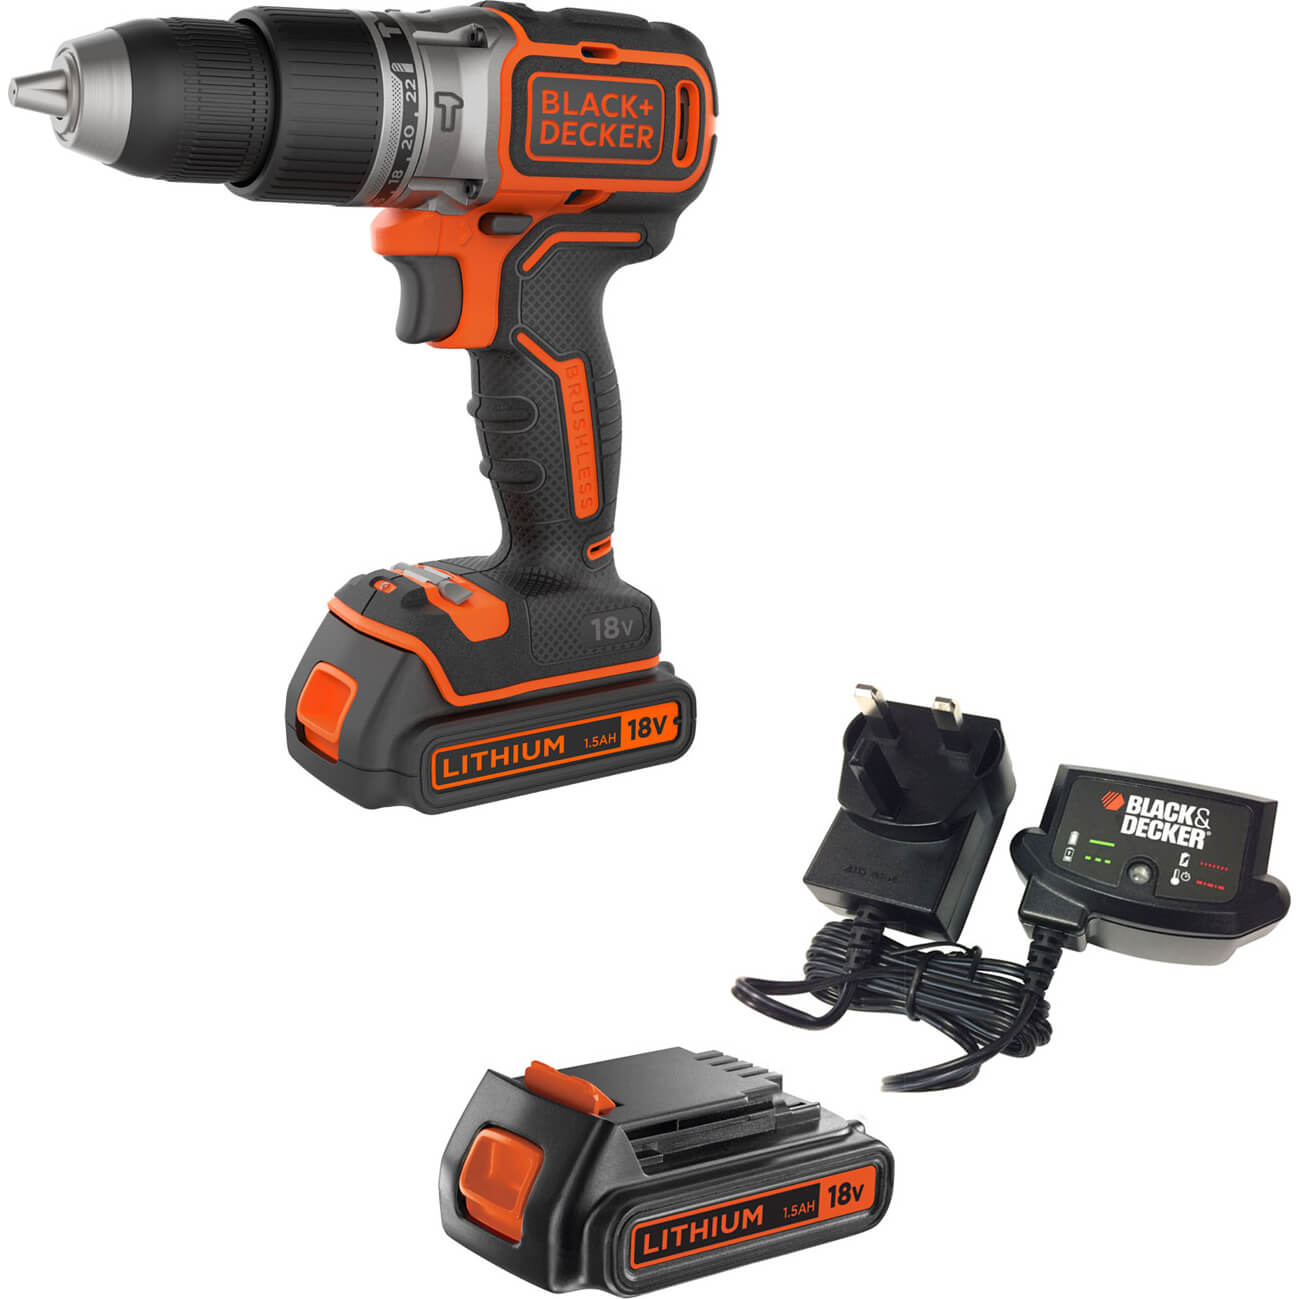 Image of Black and Decker BL188 18v Cordless Brushless Combi Drill 2 x 1.5ah Li-ion Charger No Case